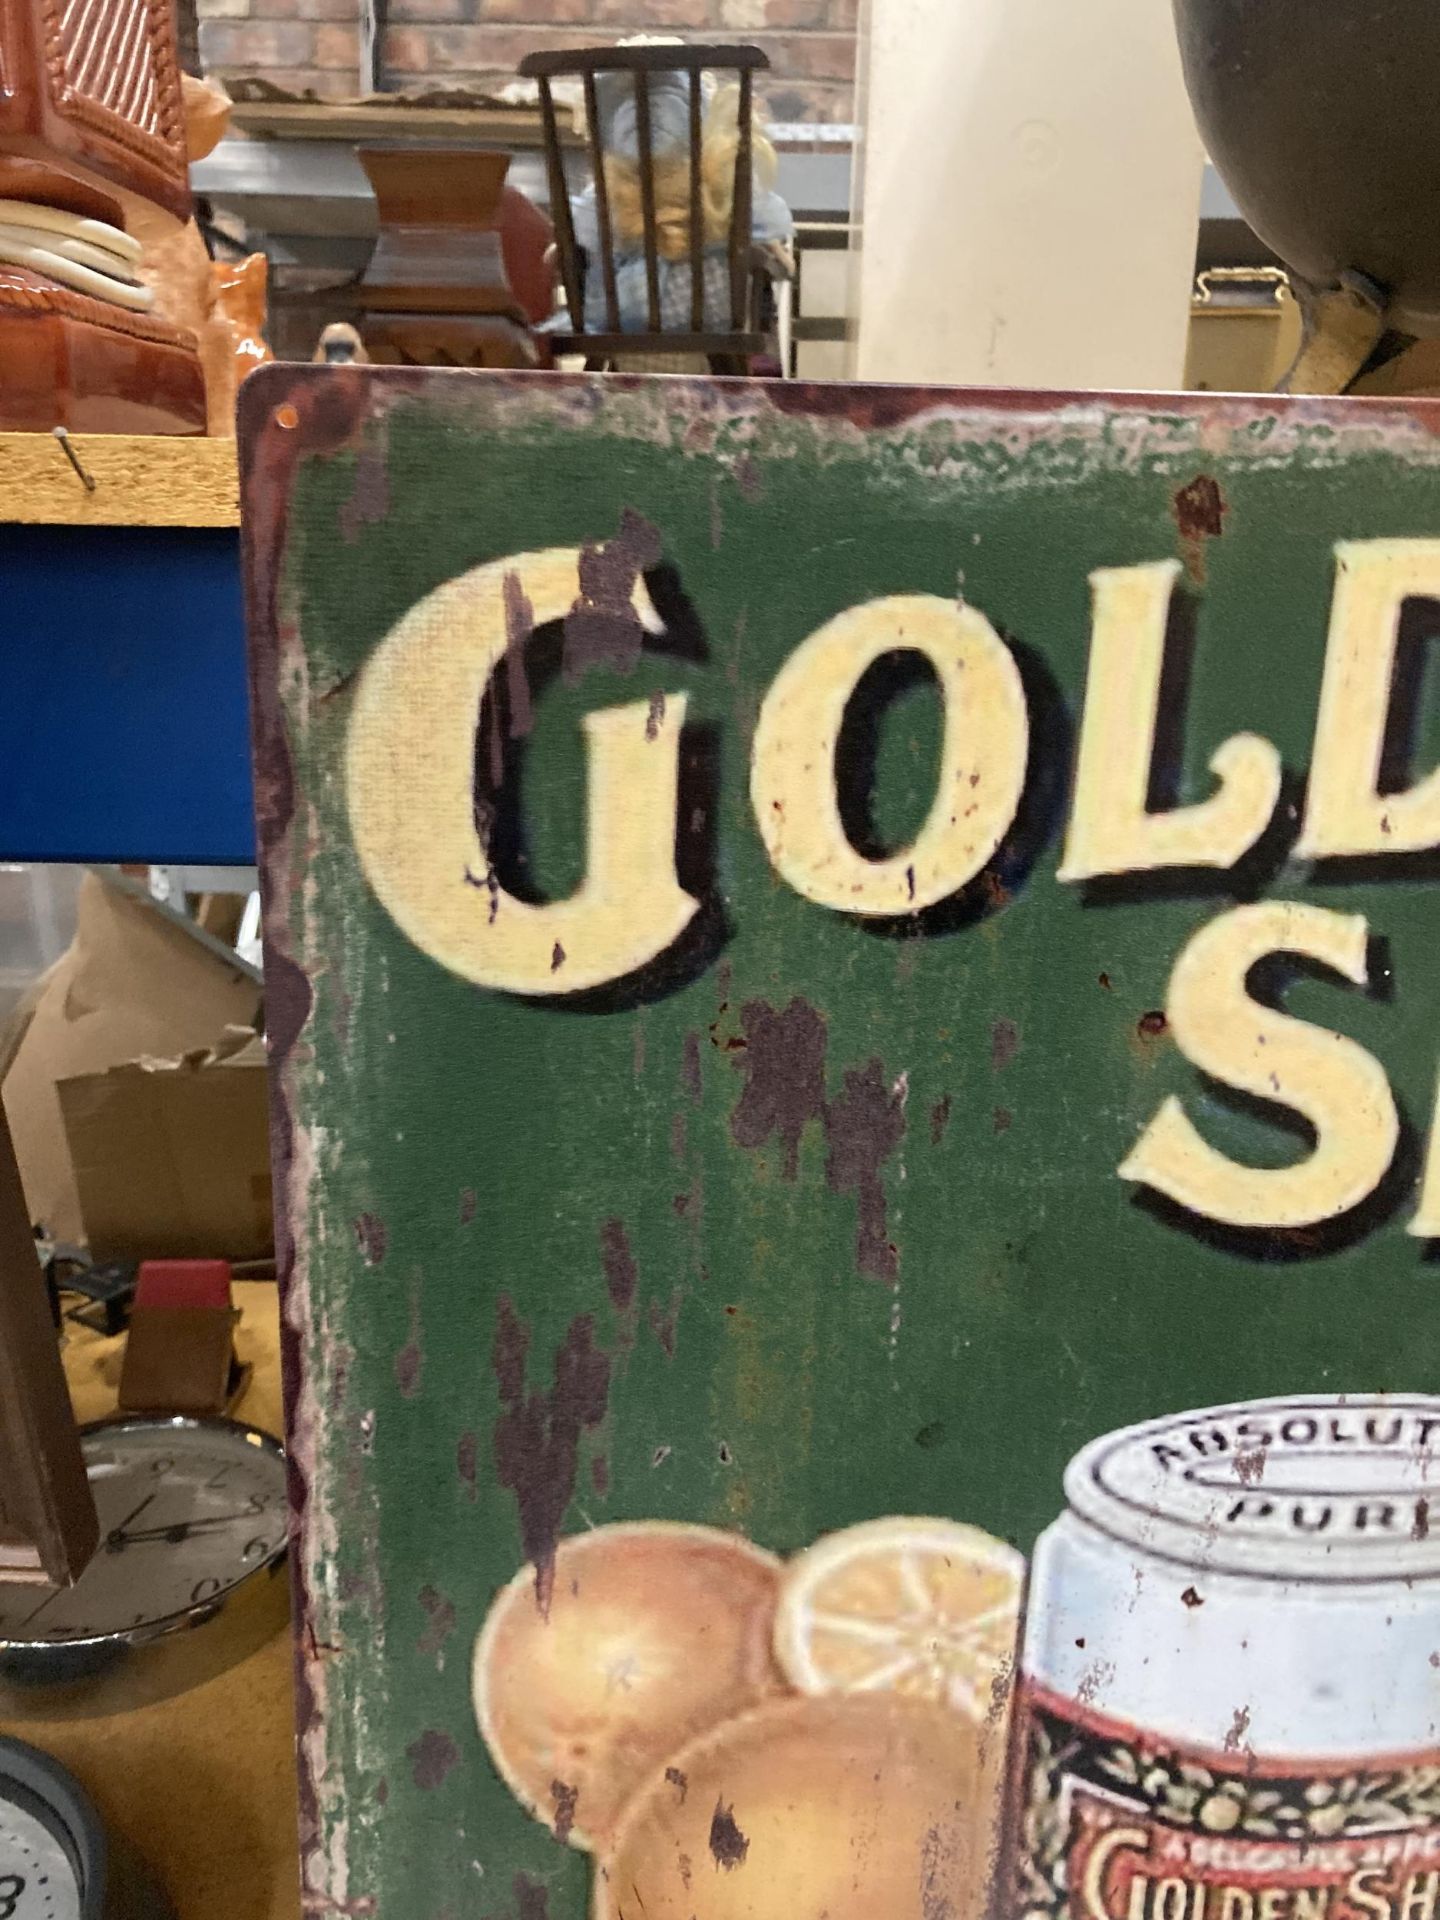 A 'GOLDEN SHRED' MARMALADE METAL SIGN 70CM X 50CM - Image 2 of 4